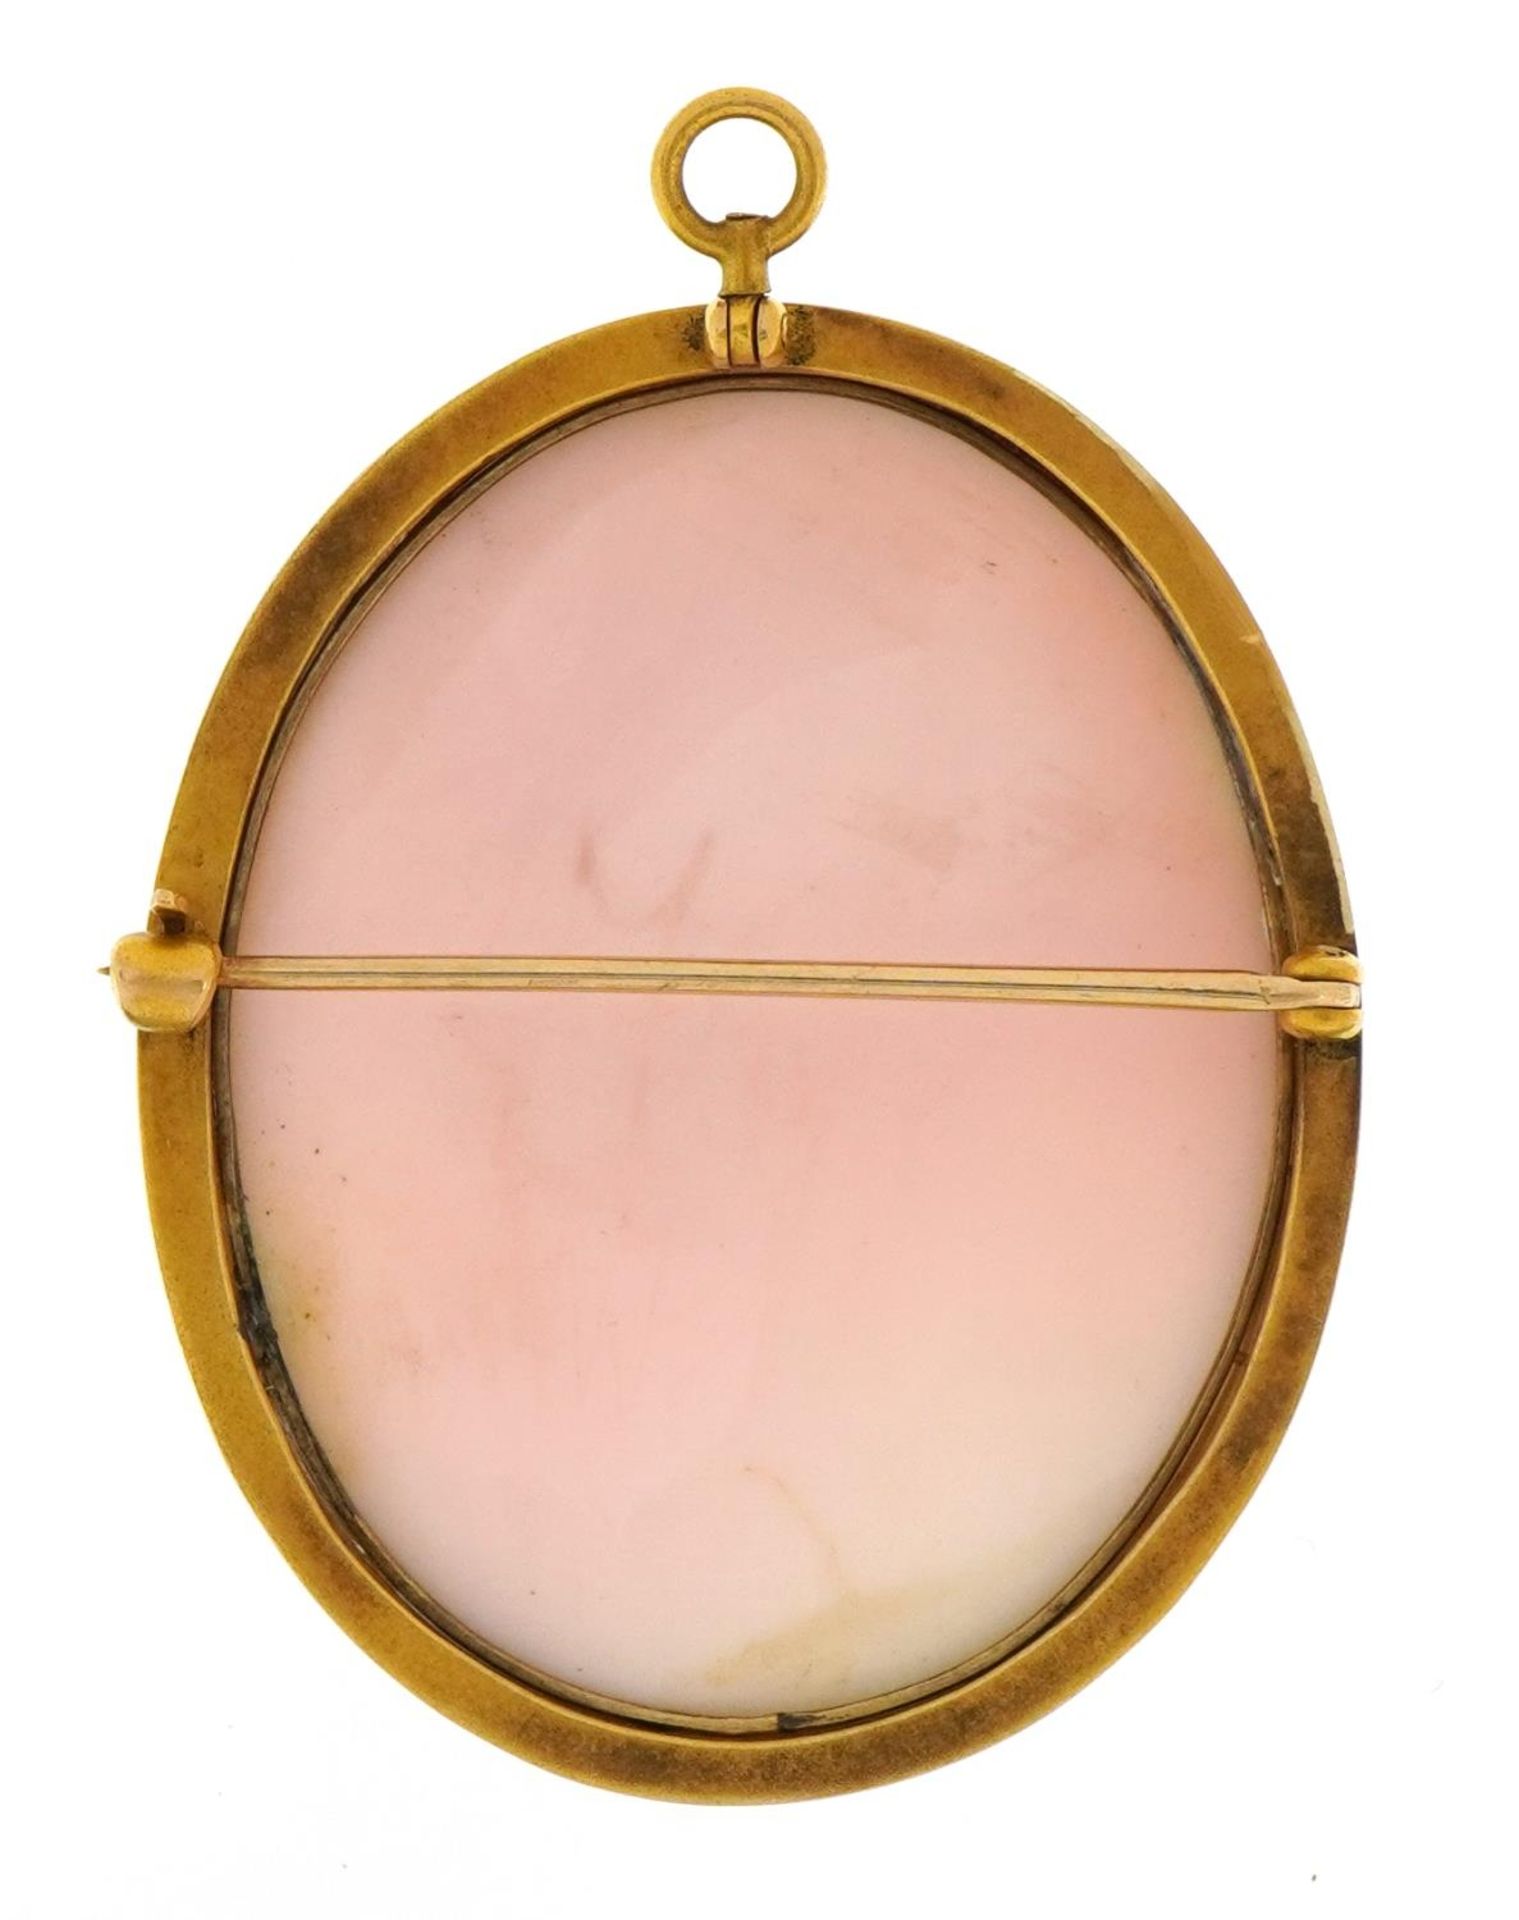 Unmarked gold cameo maiden head pendant brooch, tests as 9ct gold, 4.2cm high, 15.9g - Image 2 of 2